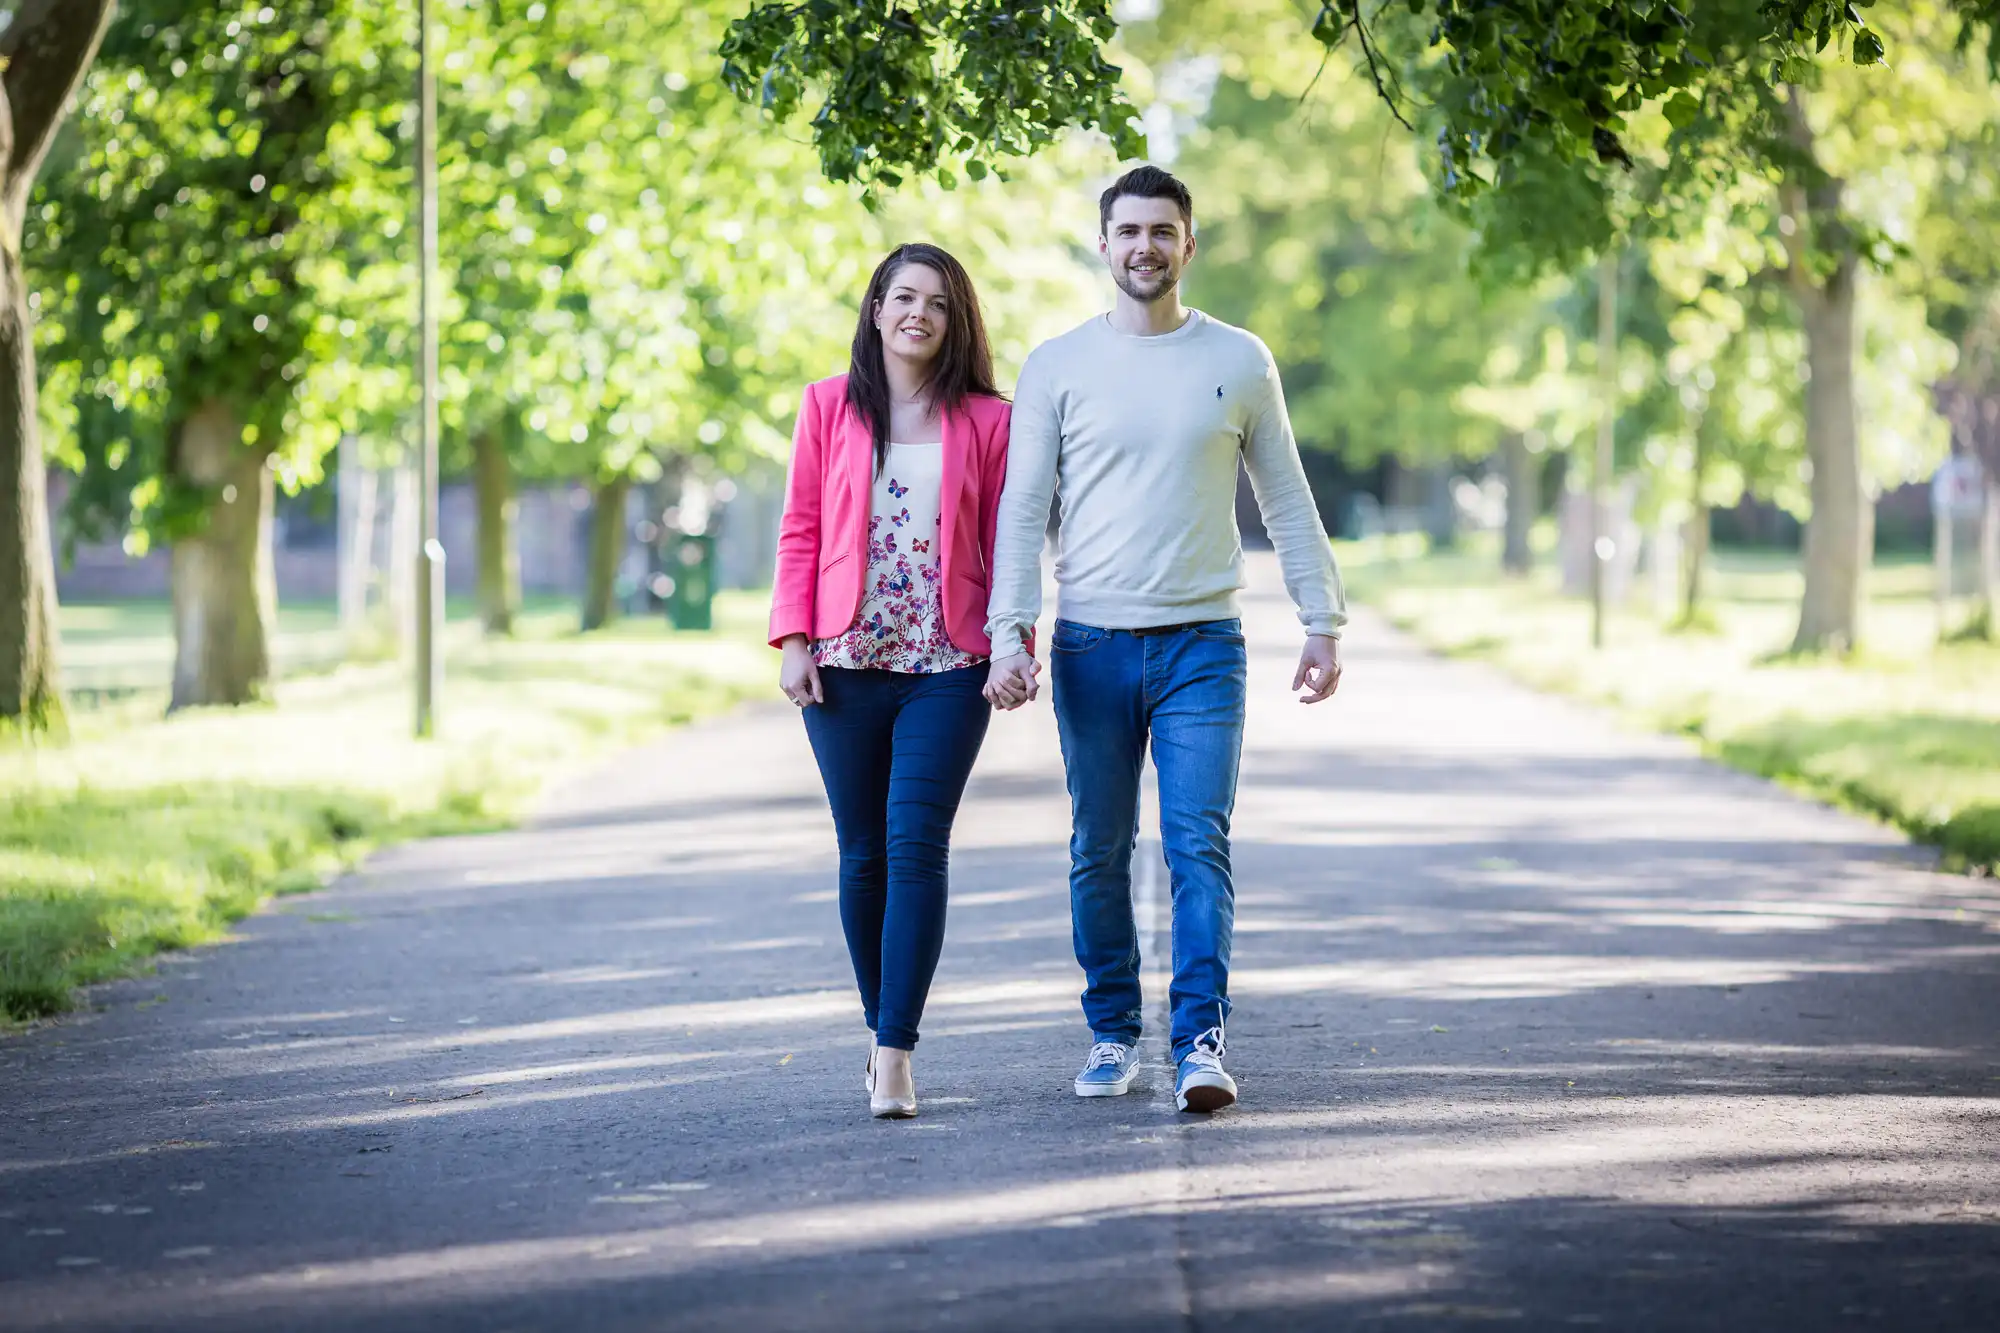 A smiling man and woman holding hands while walking down a tree-lined path on a sunny day.